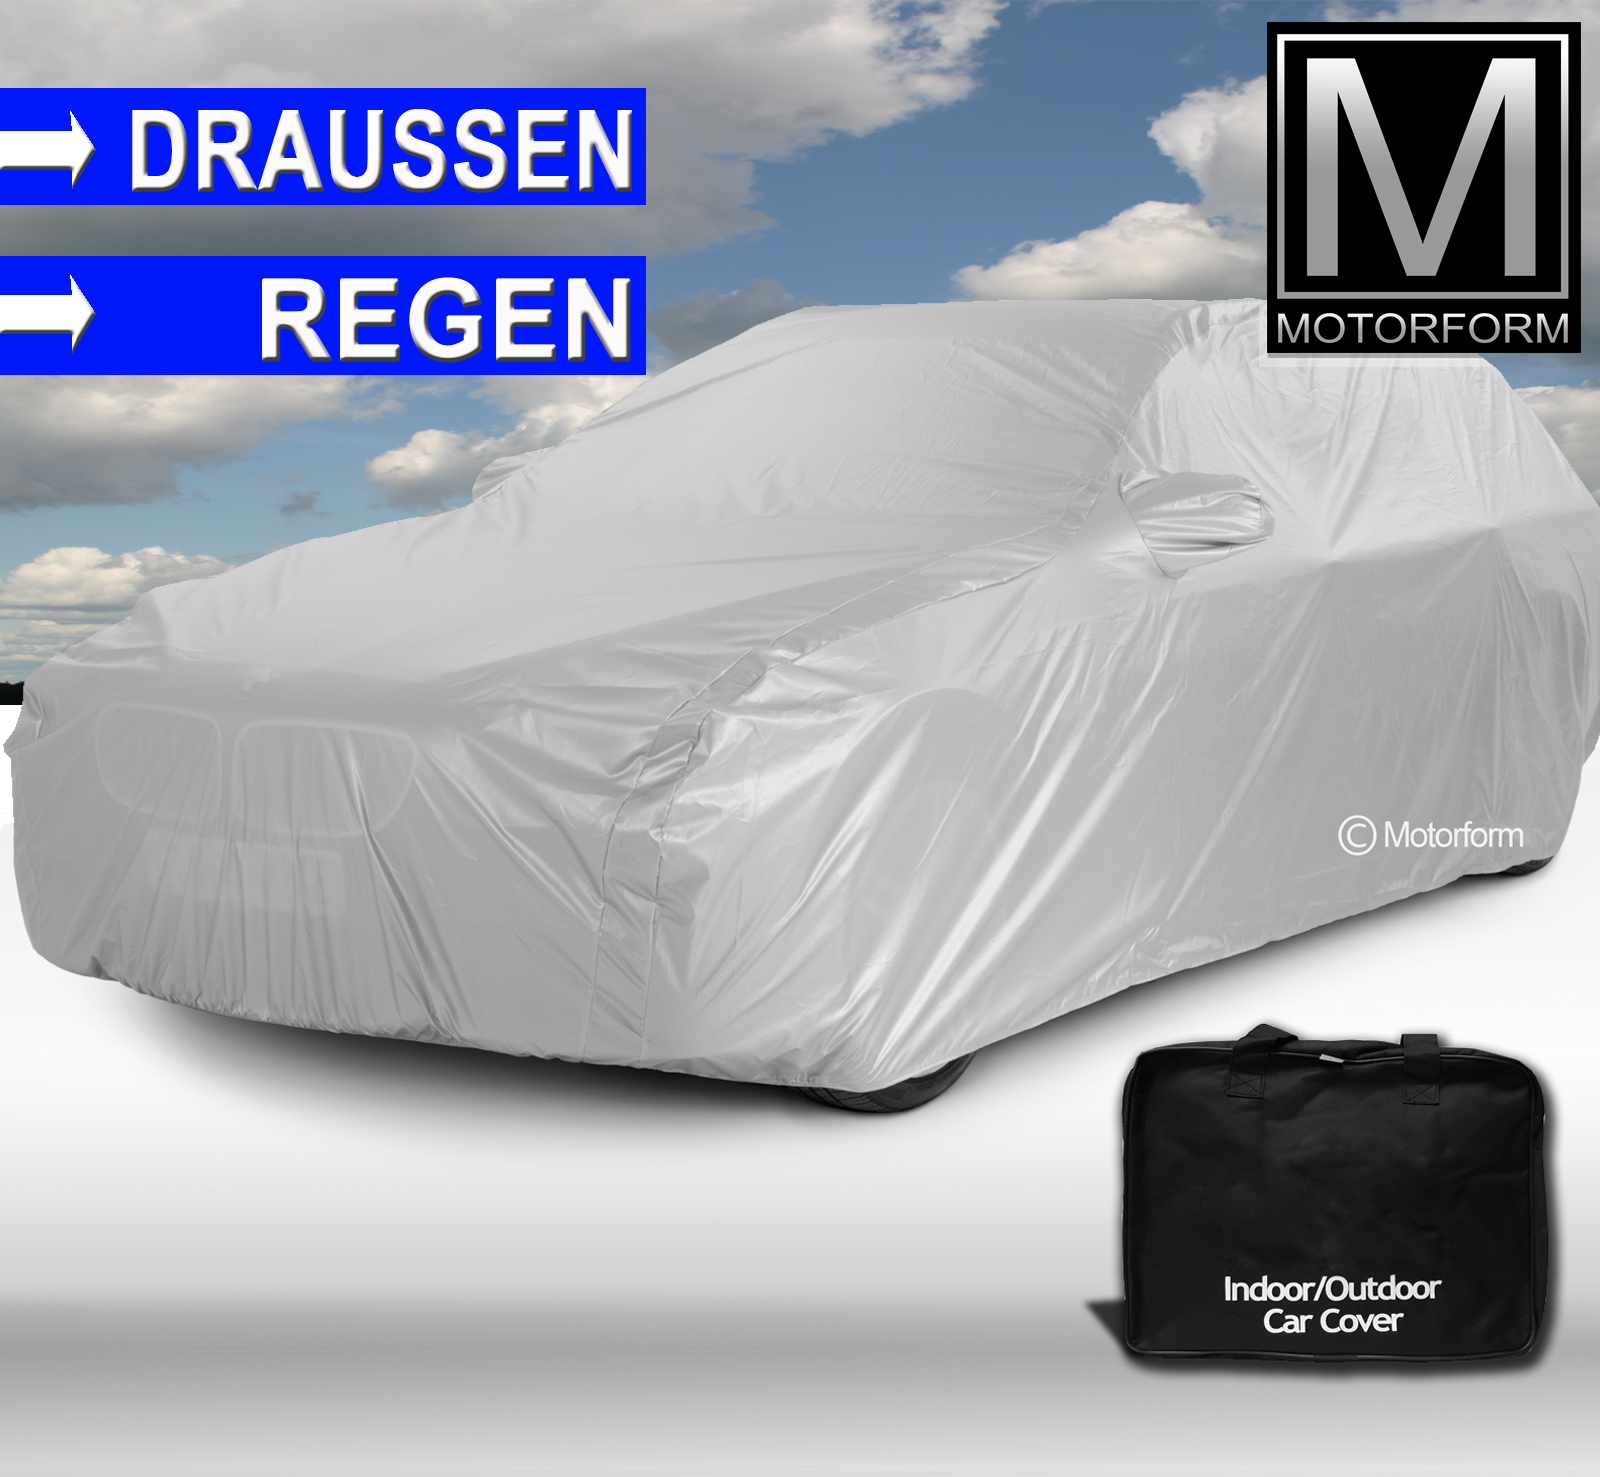 Voyager Outdoor Car Cover for Mazda6 Kombi (2012-)